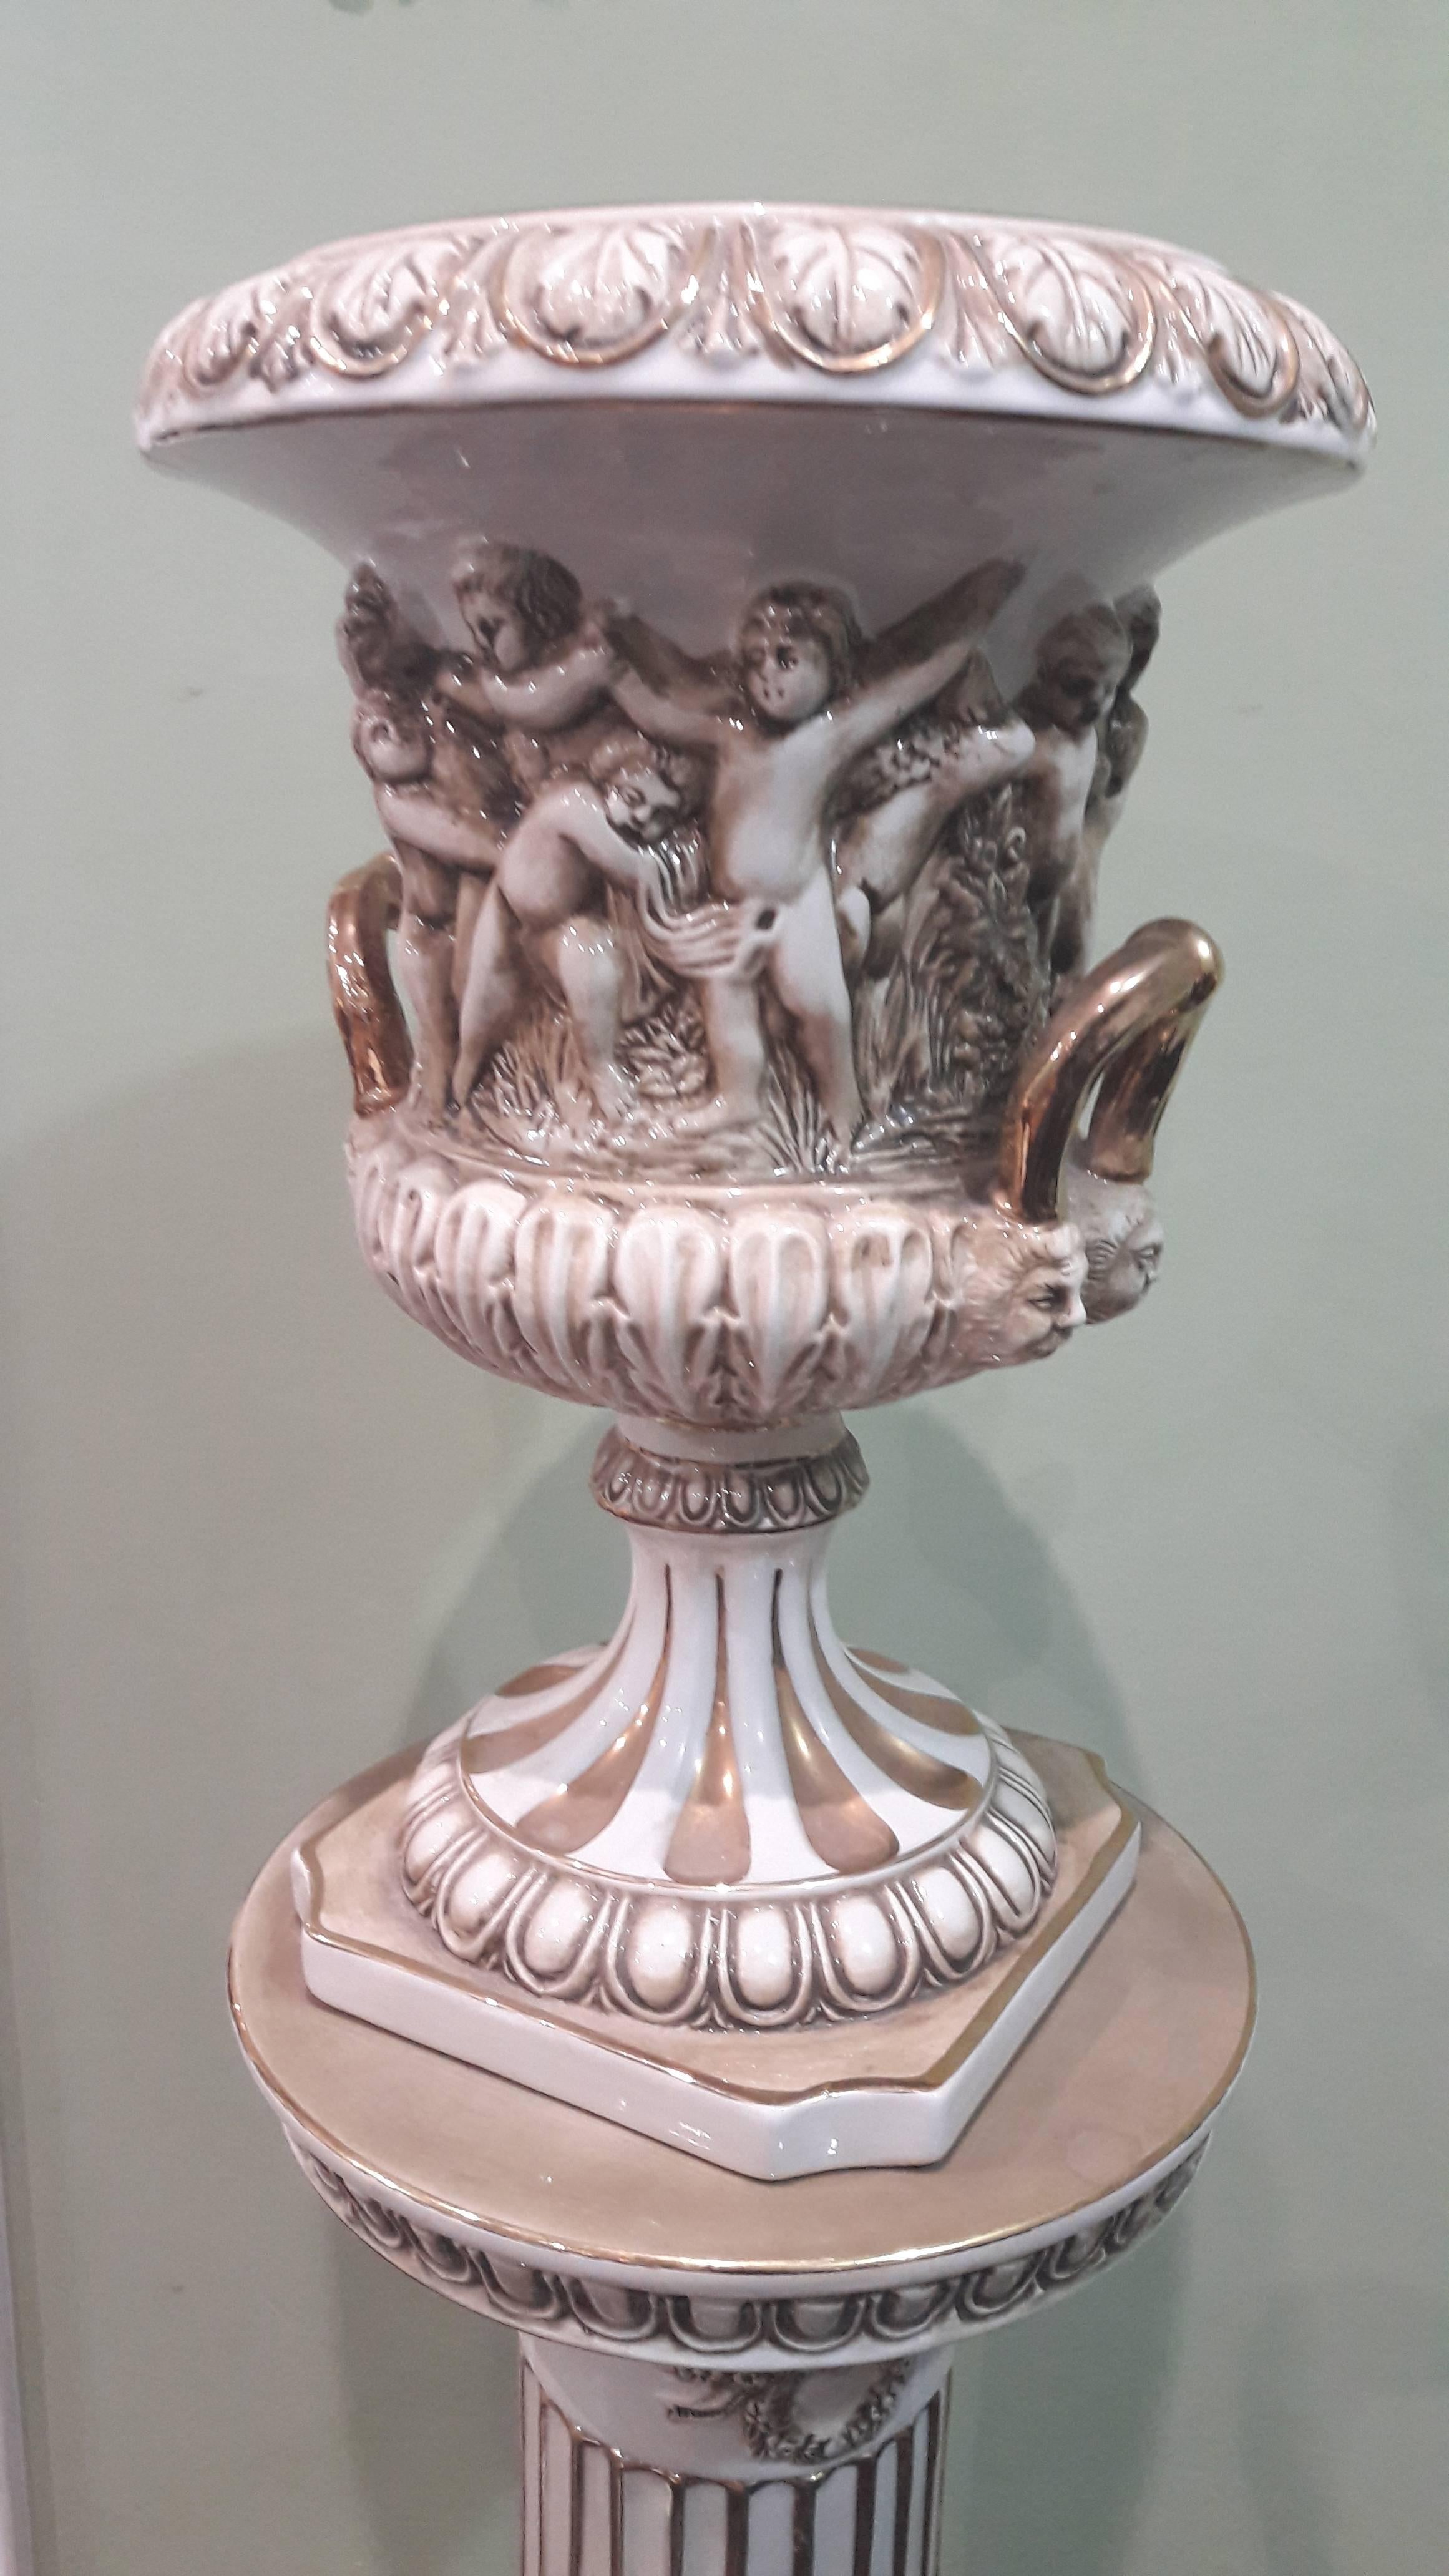 Original Capodimonte porcelain pedestal or column in one piece. And the second part, on the top of it, its Cachepot vase, all beautifully decorated with putti ; ( a tradition for this finest Italian royal porcelain ), and gold handles.
Solid and